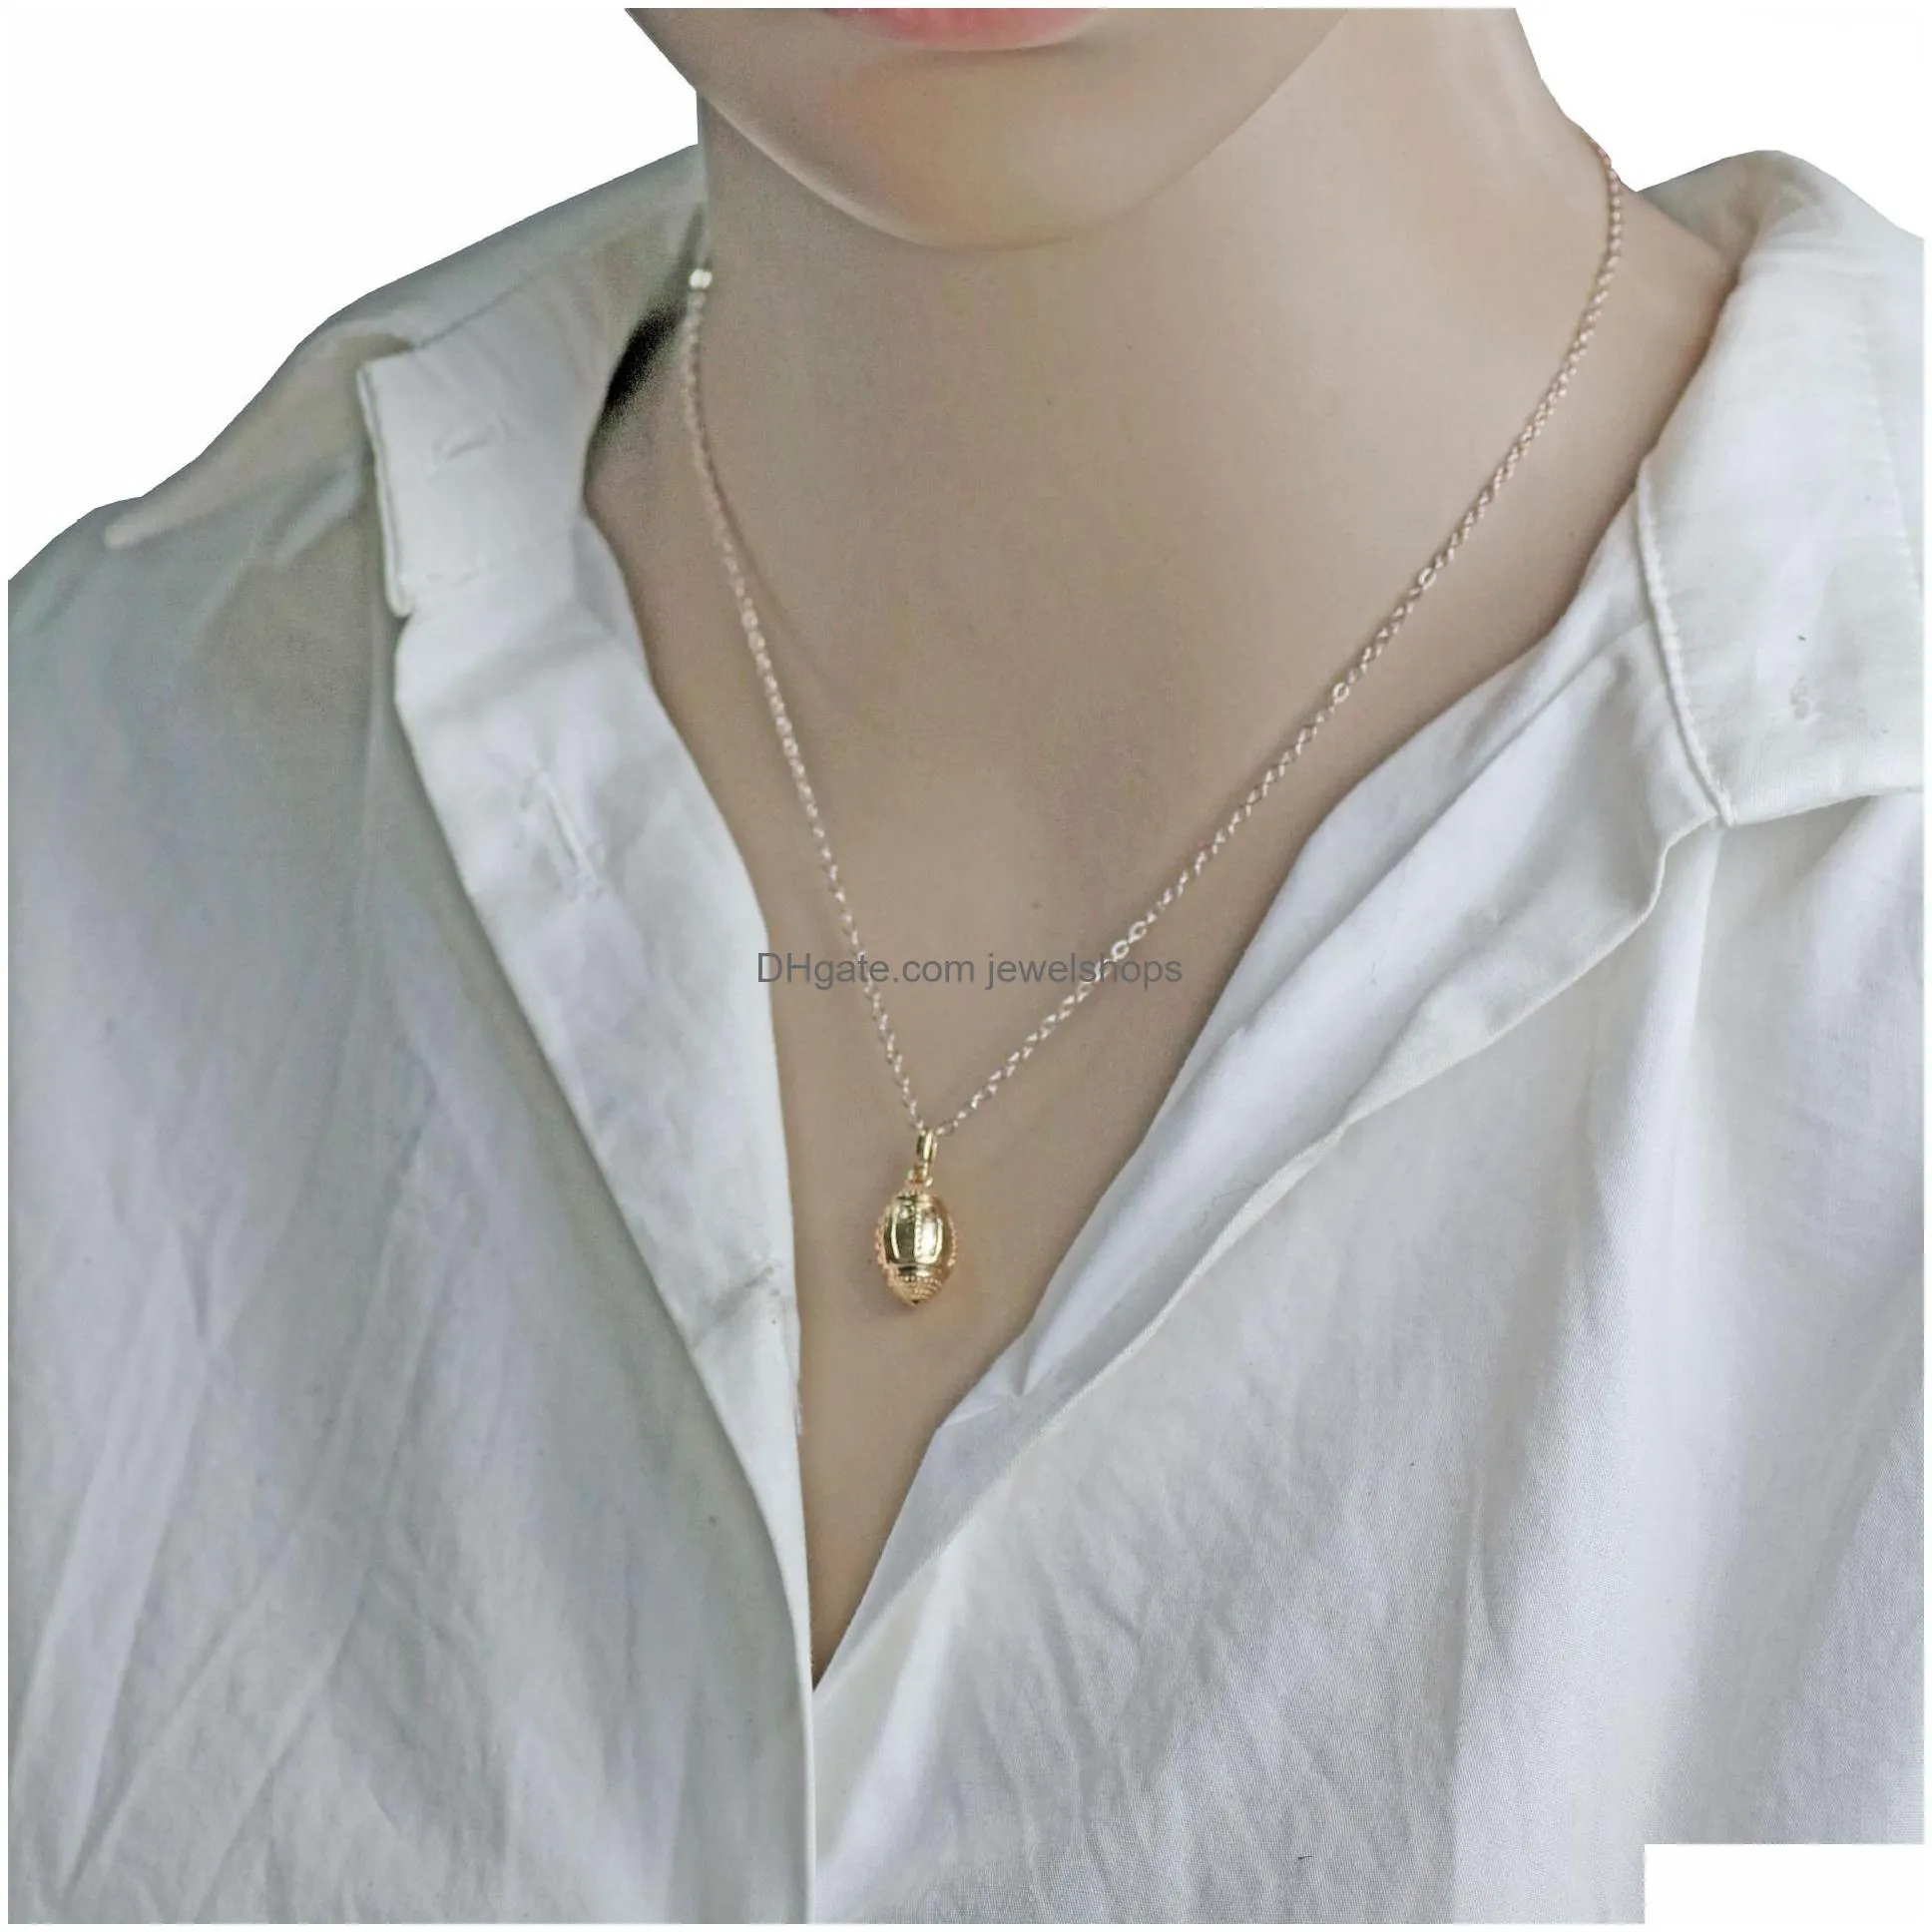 Pendant Necklaces 18K Gold American Football Sports Necklaces For Women Rugby Shape Pendant Chains Fashion Lovers Jewelry Gift Drop De Dh4Wt